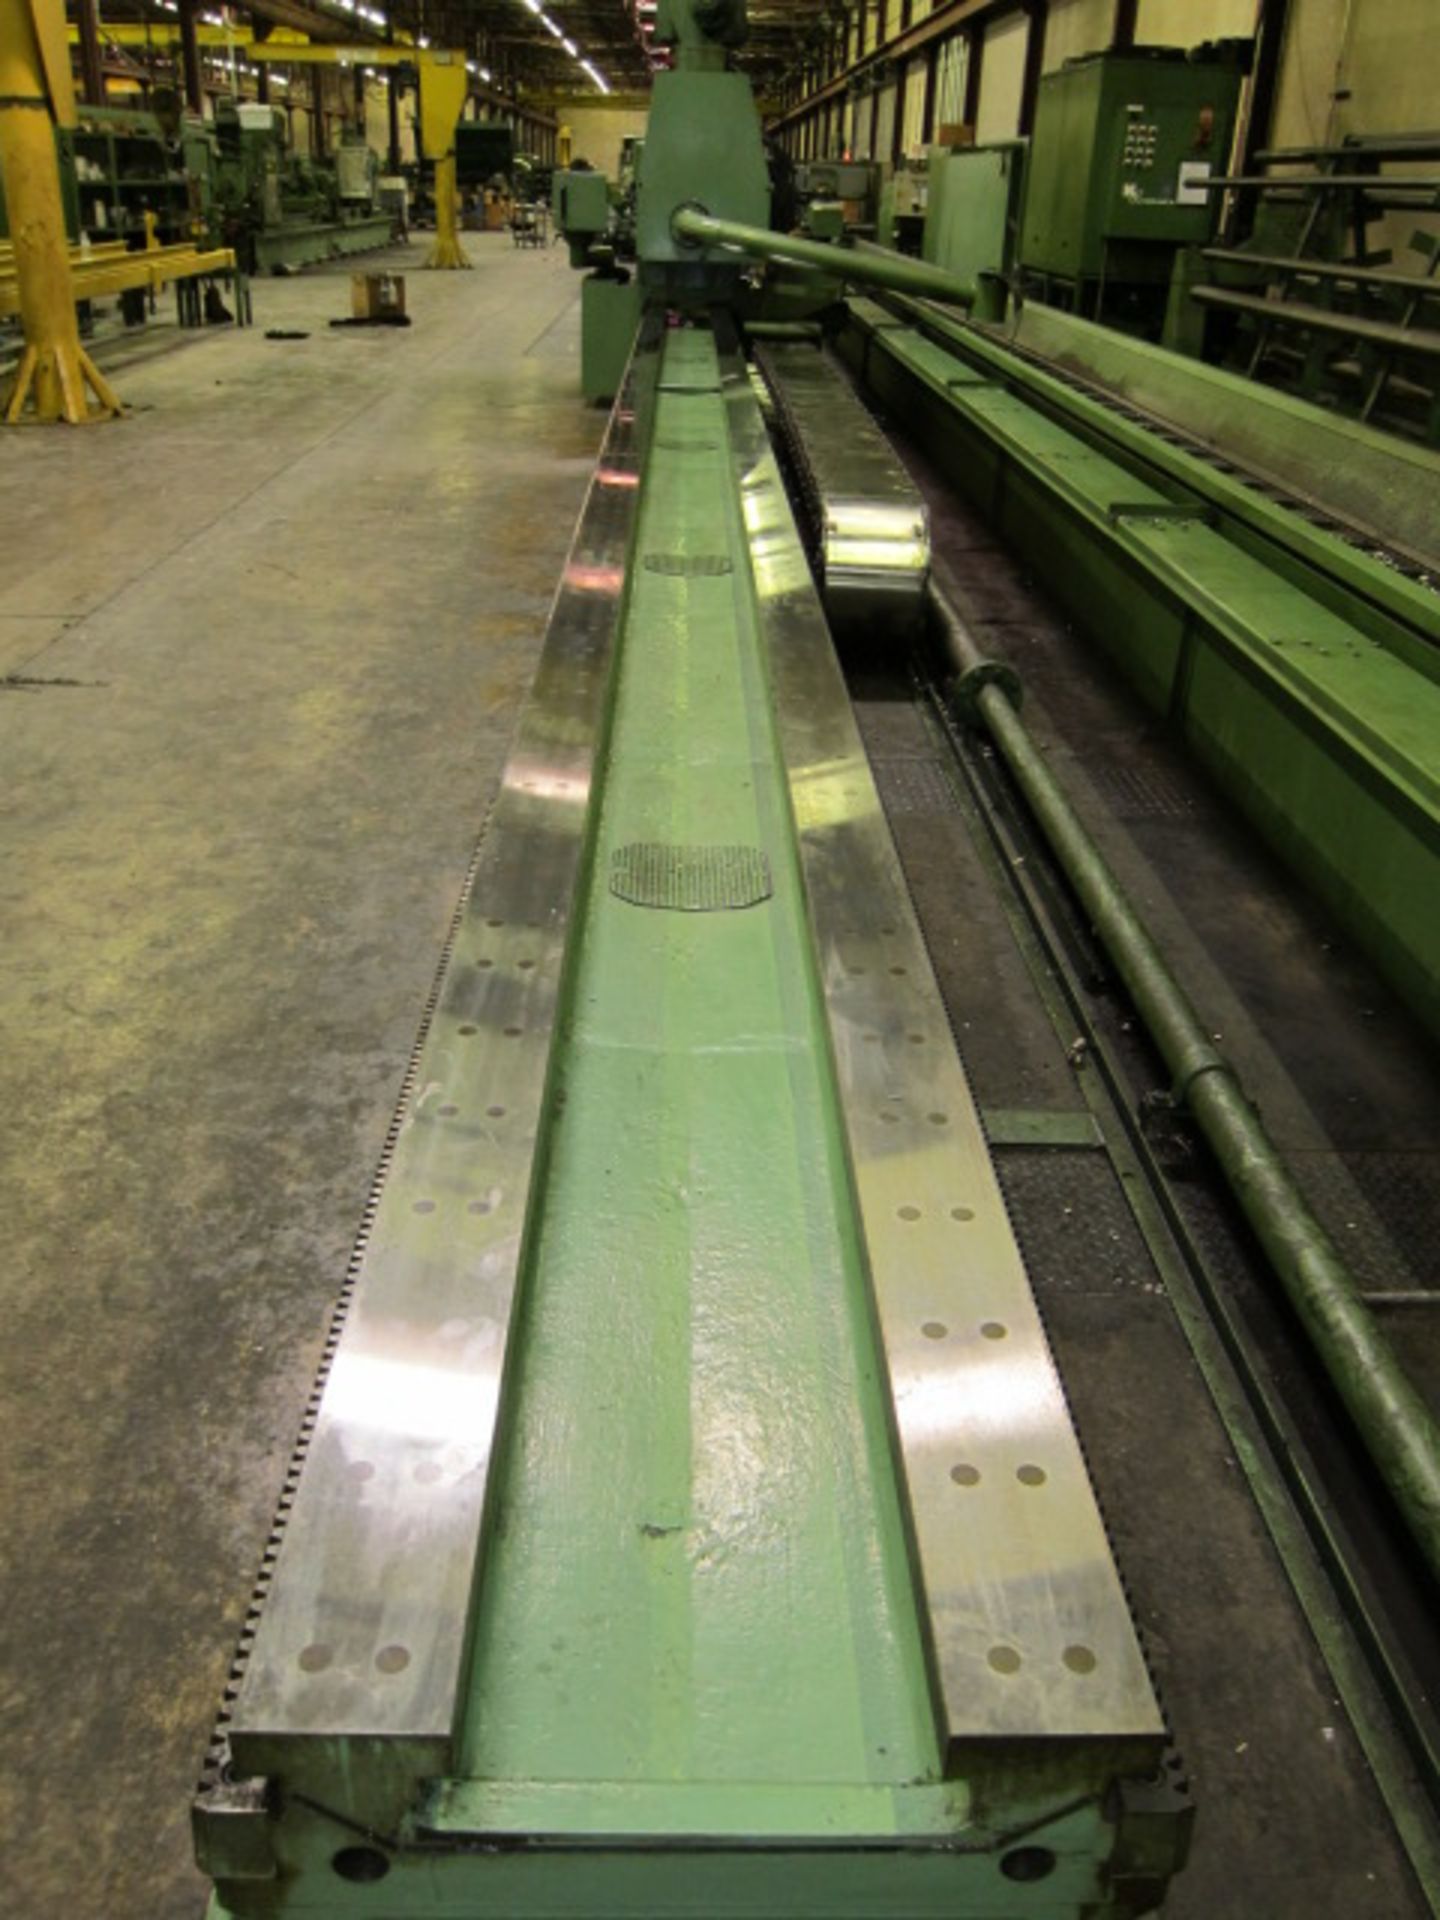 COUNTER ROTATING DEEP HOLE BORING MACHINE, WOHLENBERG MDL. PB2-1000 X 11M, new 1995, 39.37” sw. over - Image 19 of 38